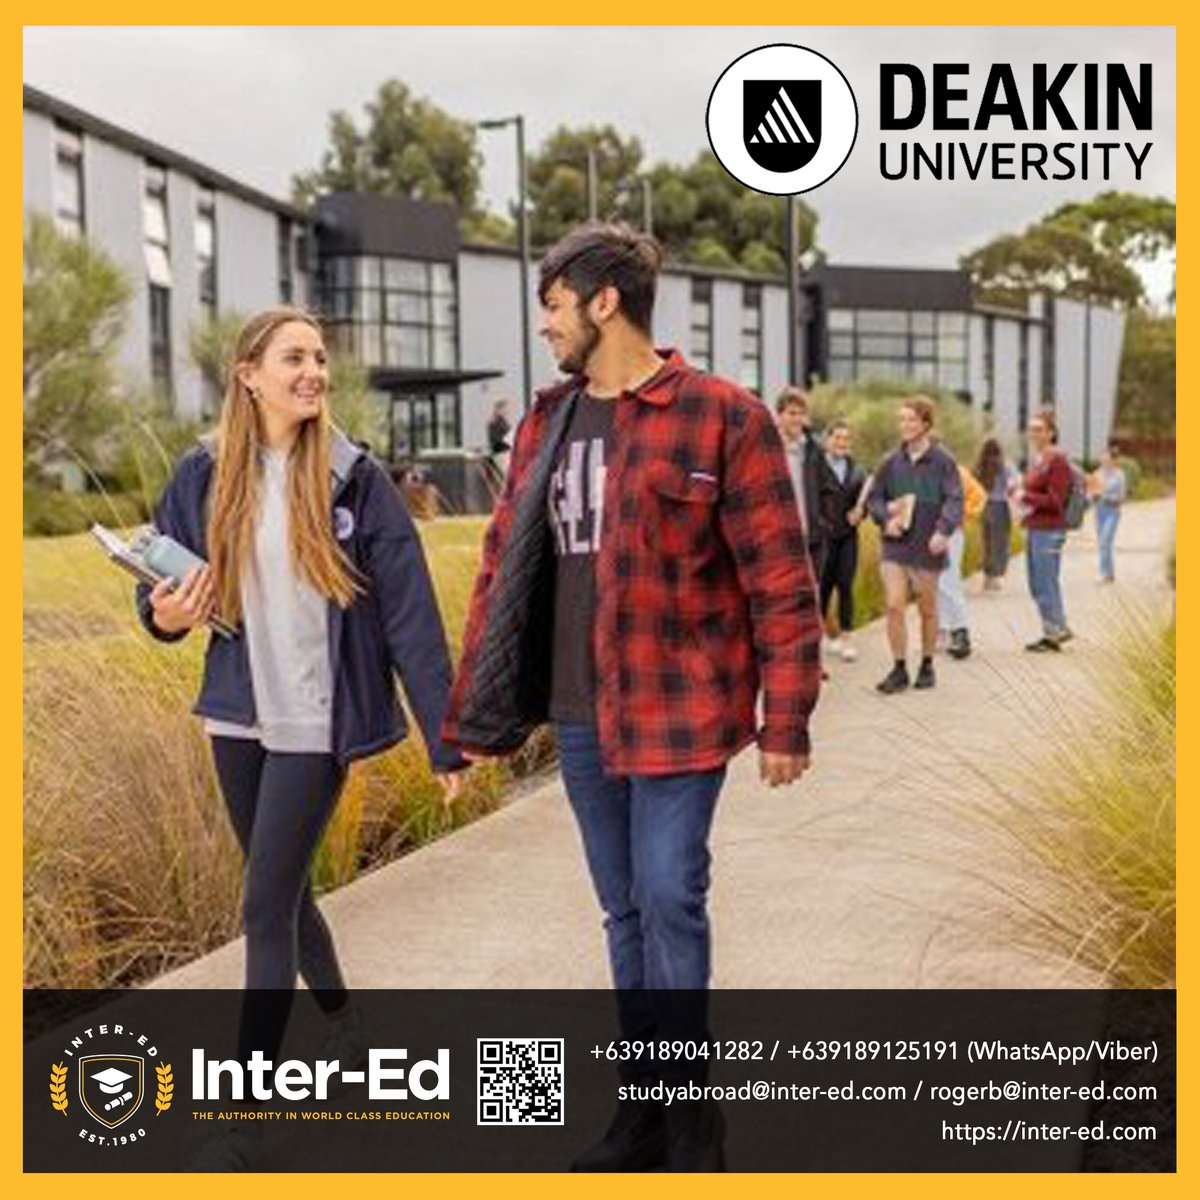 STUDY IN AUSTRALIA!!! 🇦🇺🇦🇺🇦🇺

DEAKIN UNIVERSITY

Send your updated CV/resume to studyabroad@inter-ed.com for assessment. You may contact INTER-ED at +639189041282 (WhatsApp/Viber) or visit inter-ed.com

#InterEdPH #StudyAbroad #StudyInAustralia #Deakin #Australia